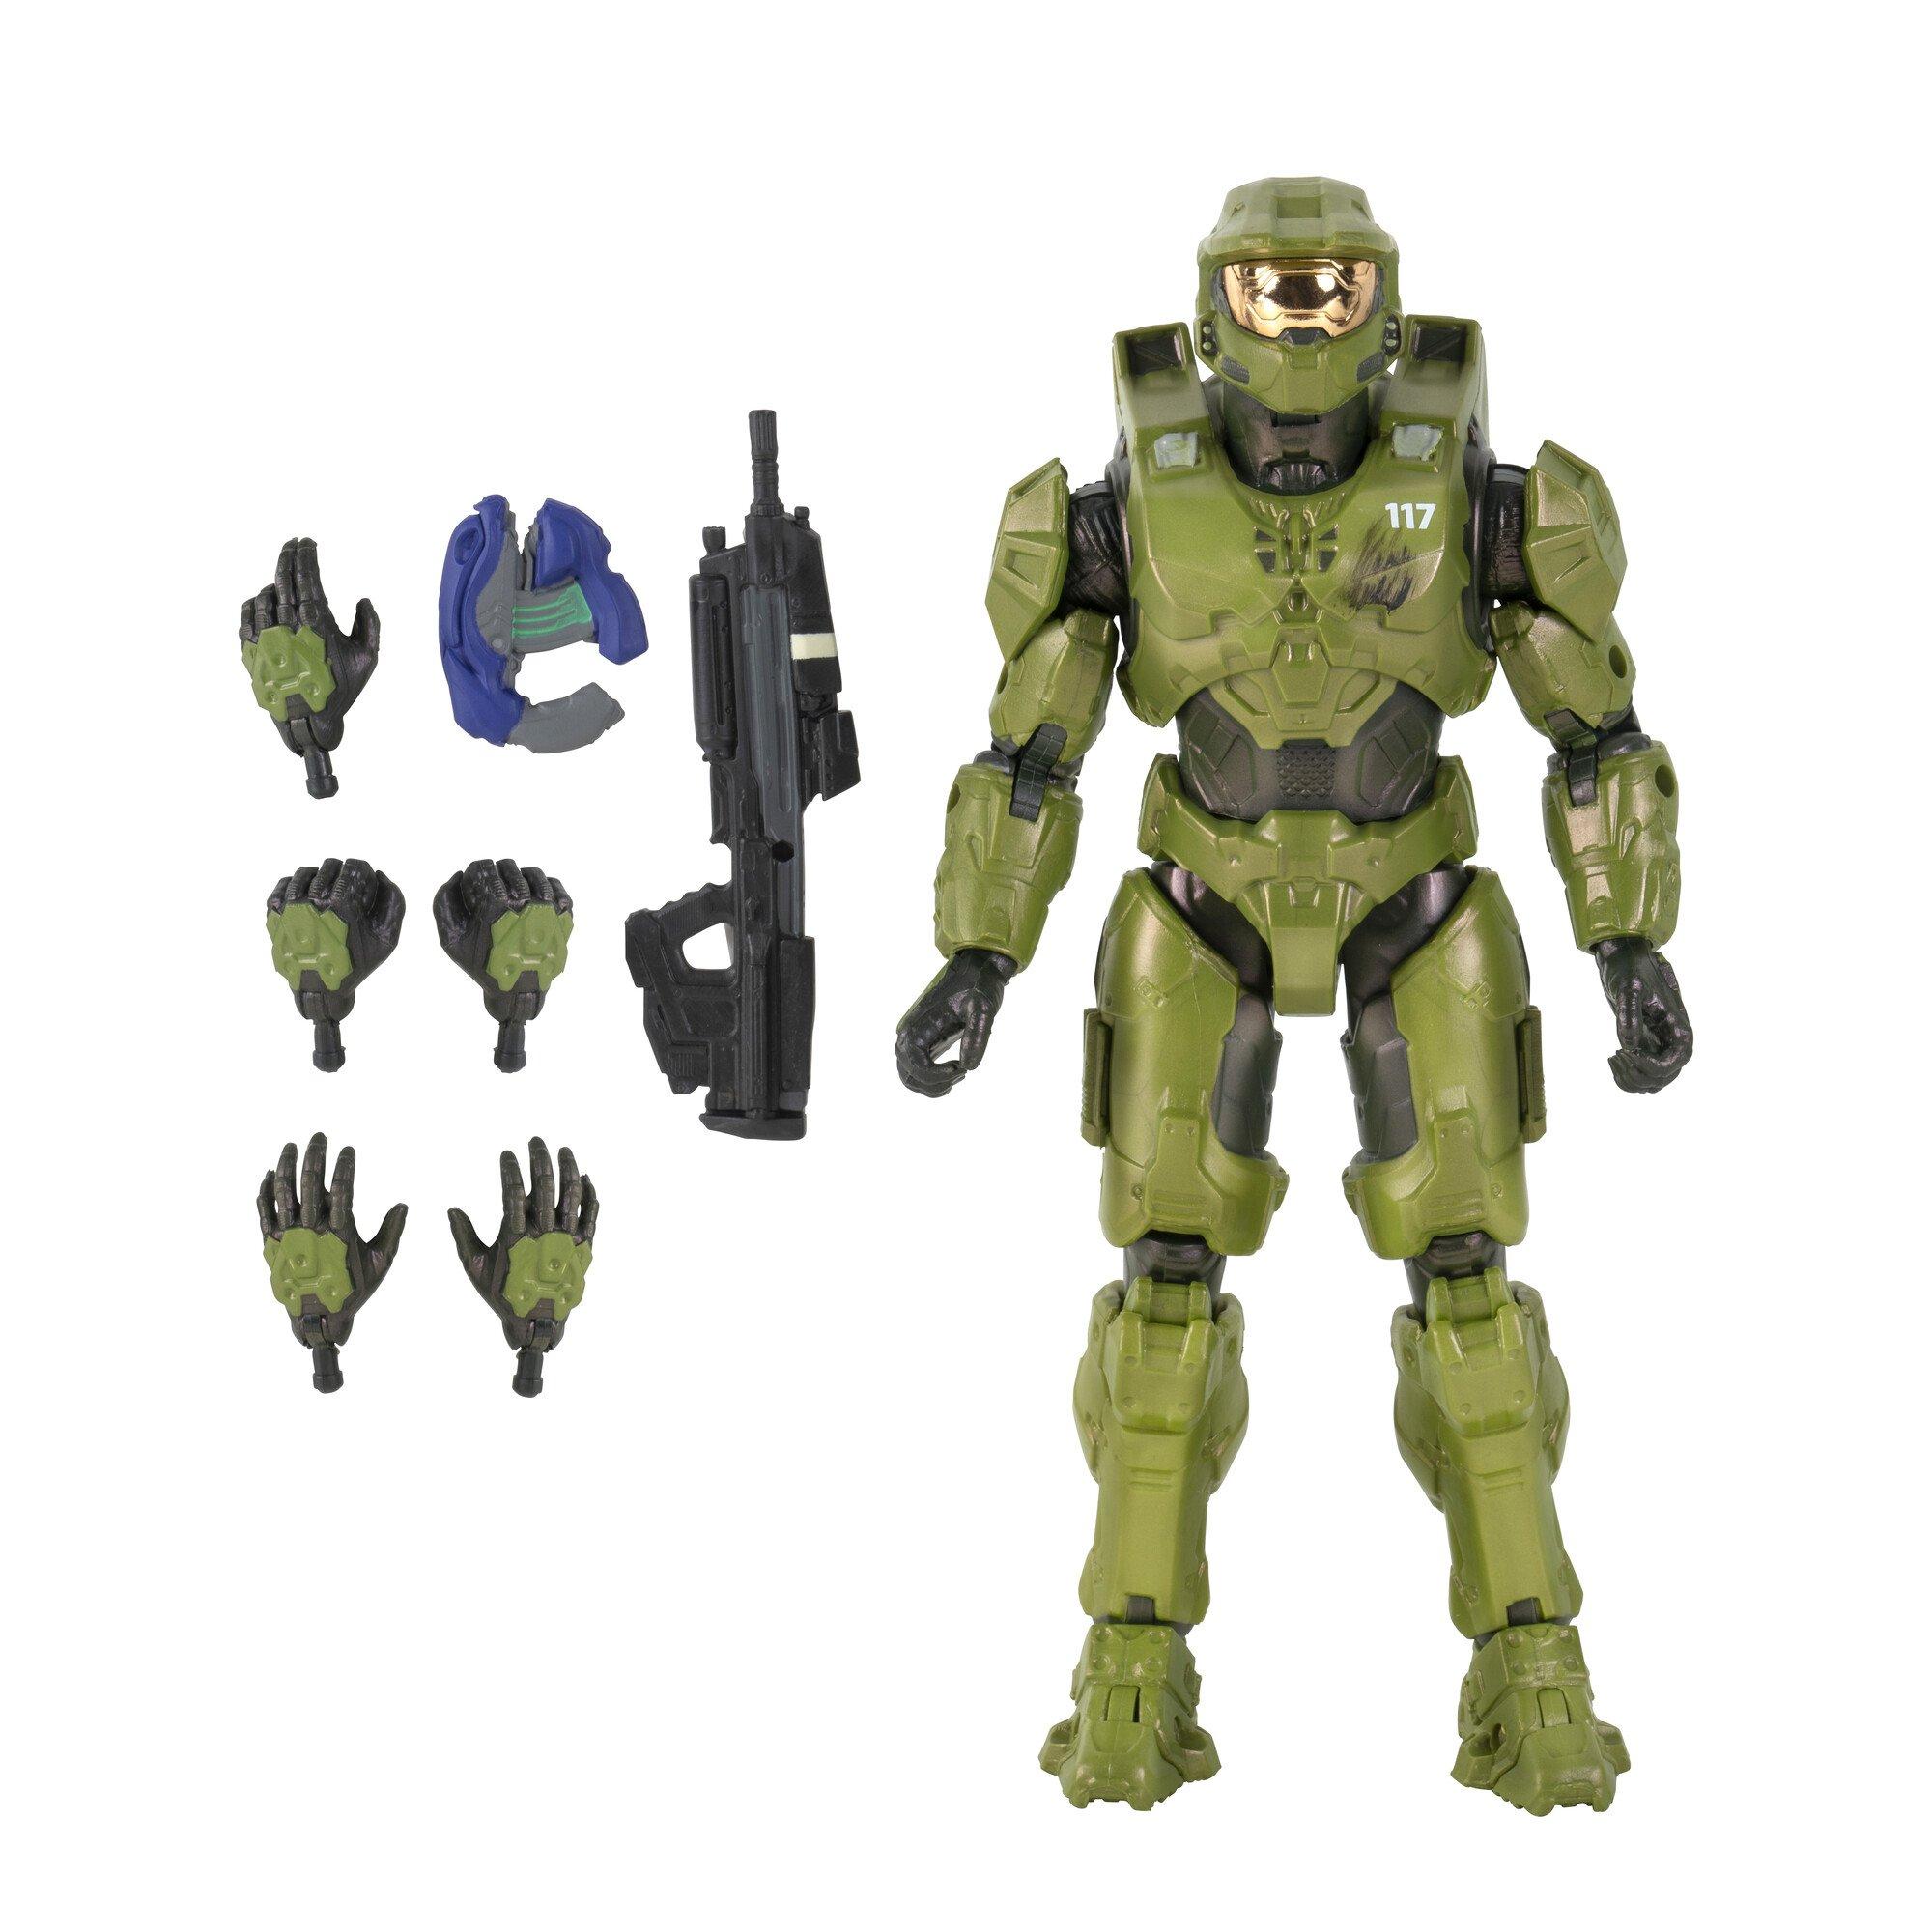 HLW0018 for sale online Halo The Spartan Collection Master Chief Action Figure 